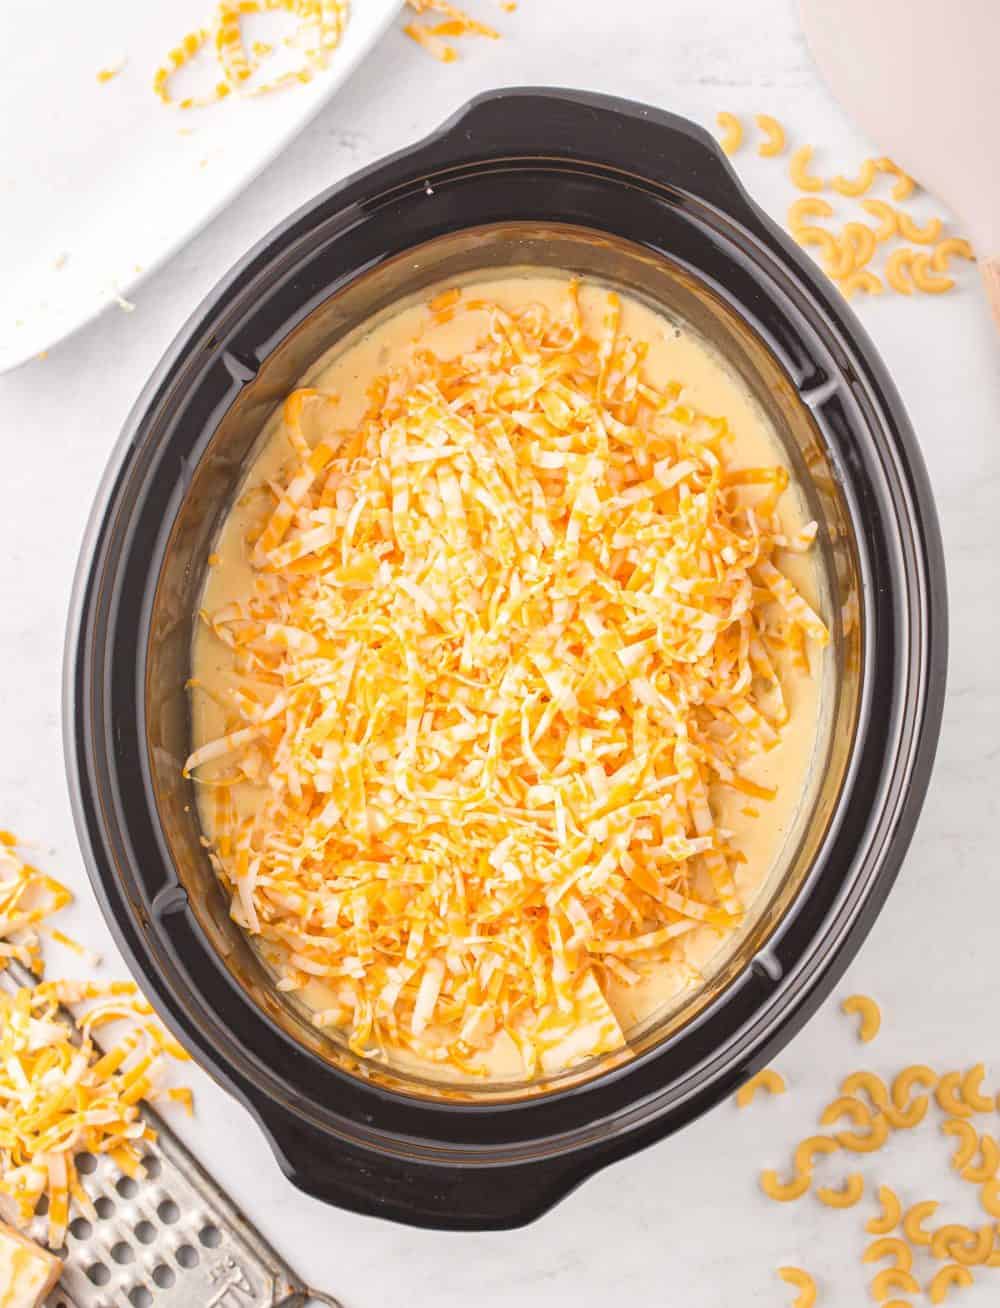 shredded cheese blend on top of a creamy sauce in a crock pot